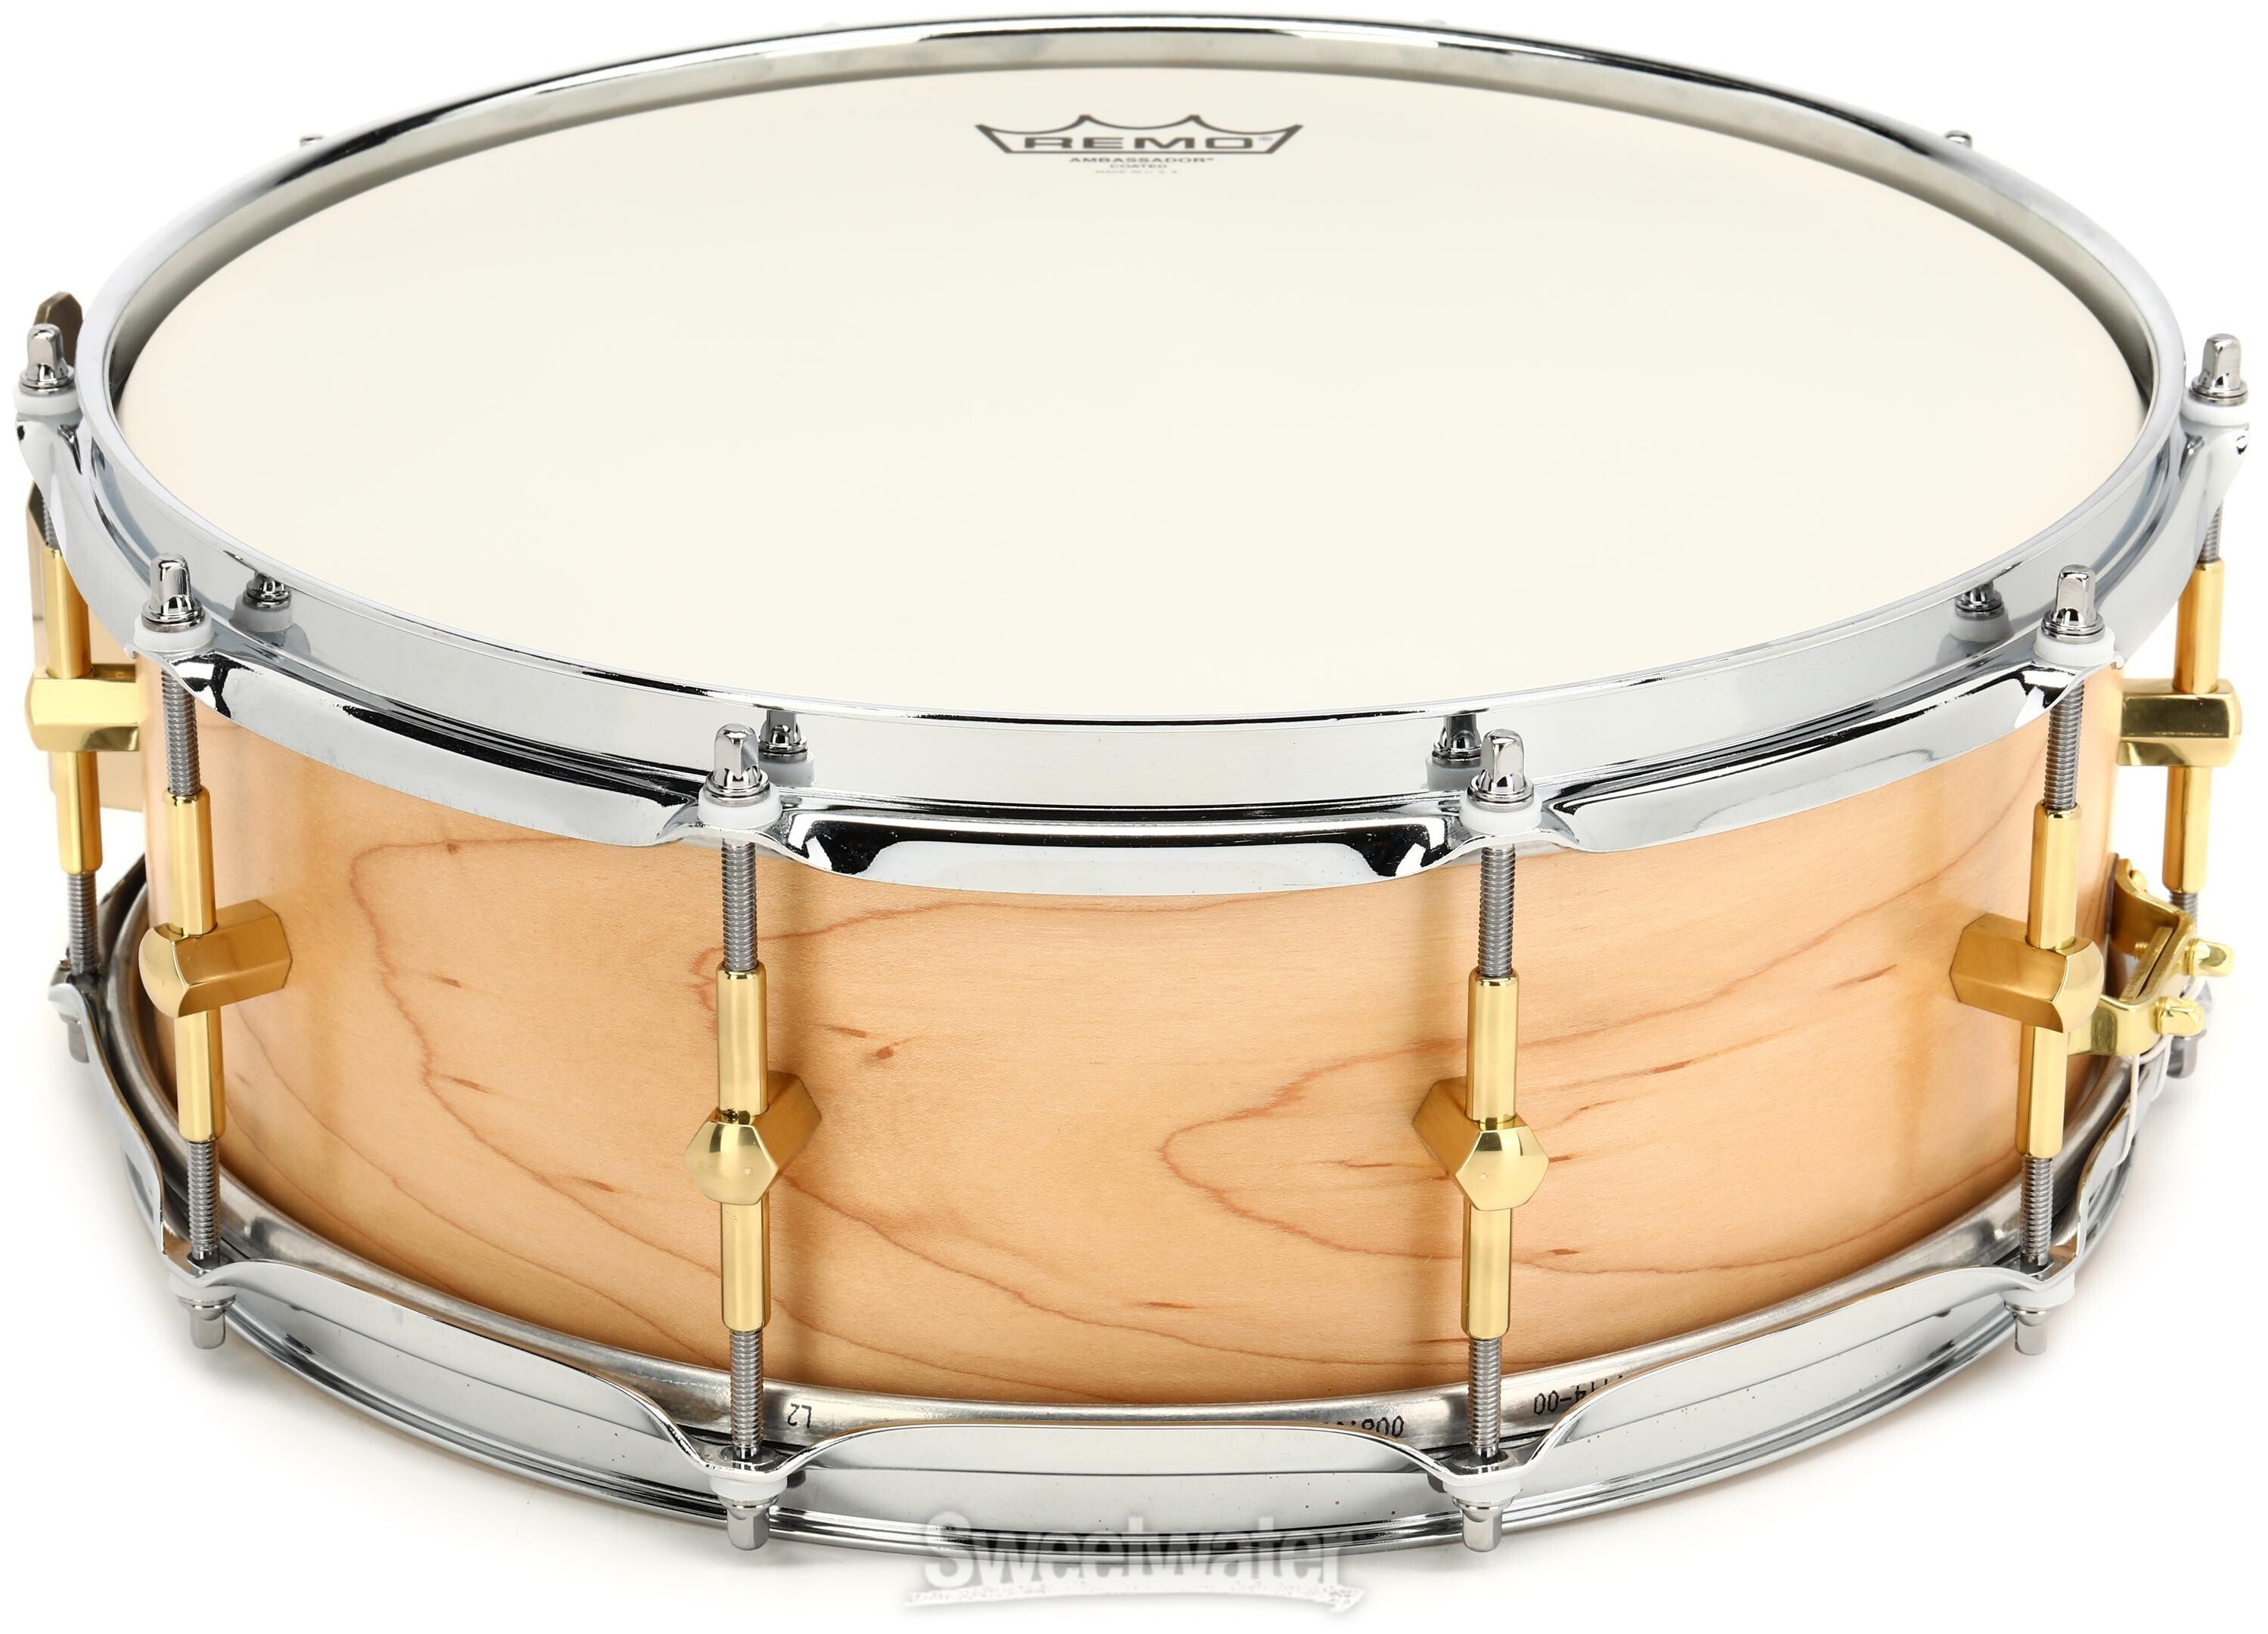 Noble & Cooley Solid Shell Maple Snare Drum - 5-inch x 14-inch